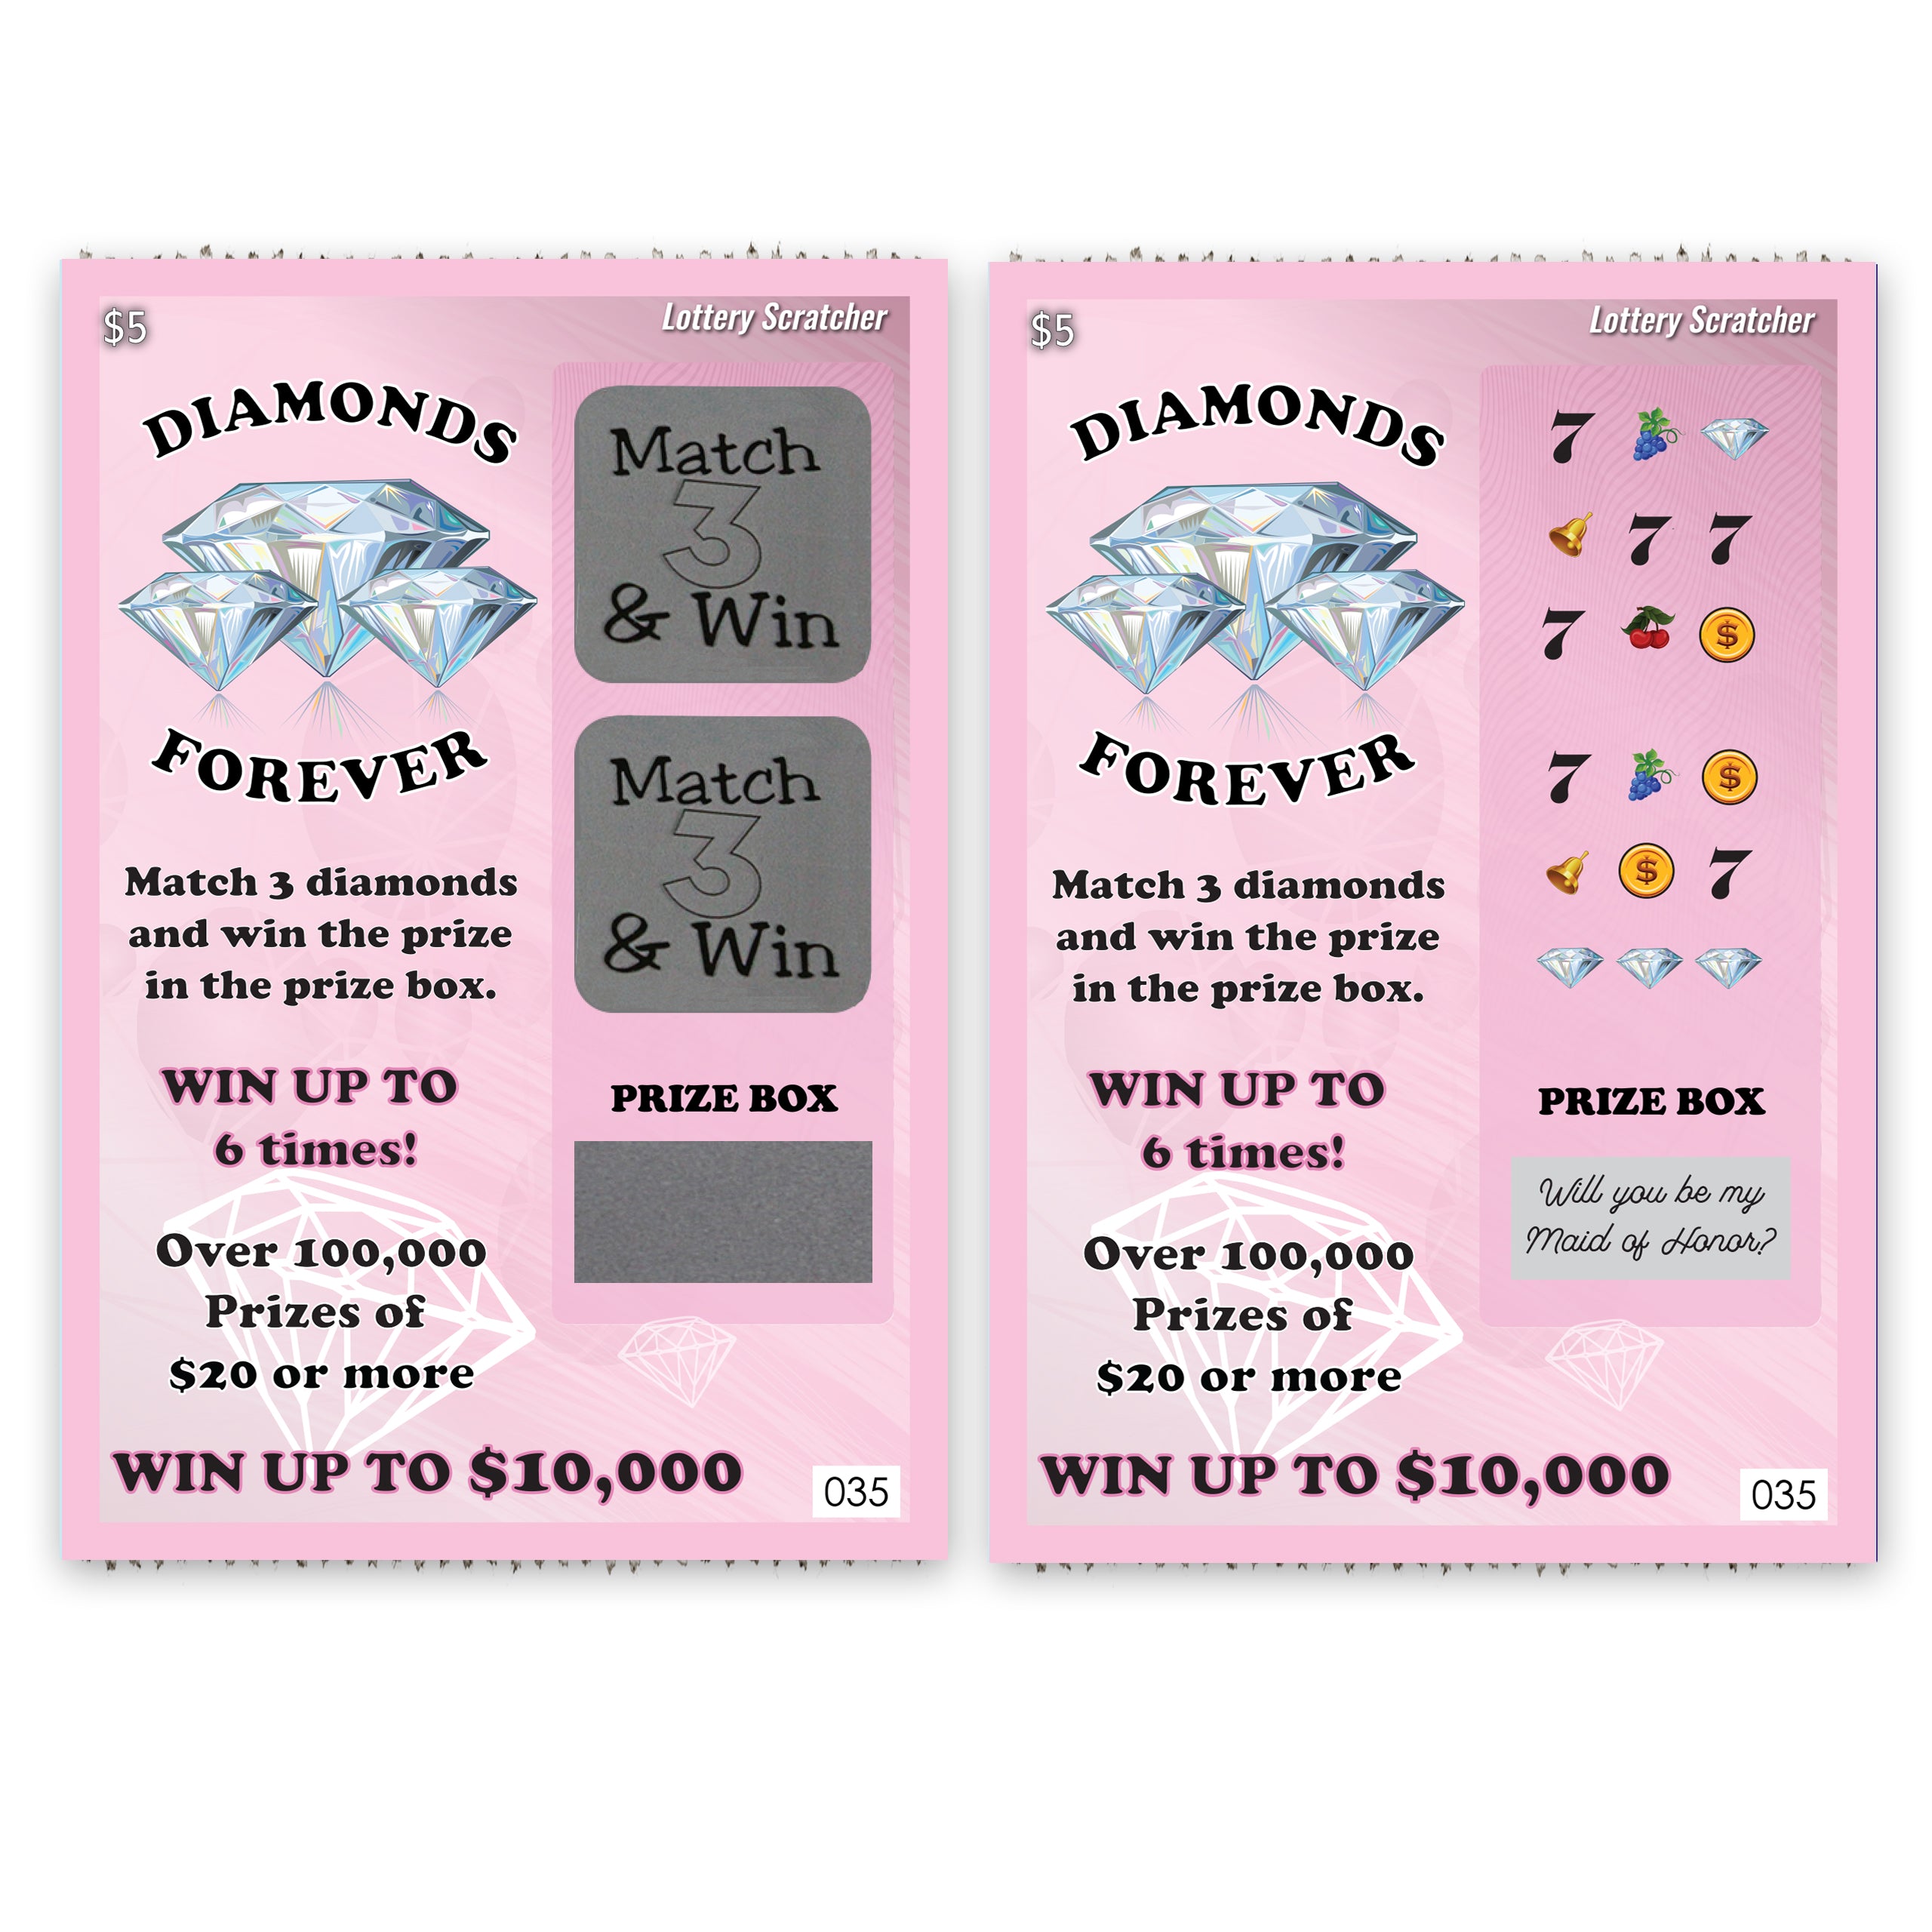 Will You Be My Maid of Honor? Lotto Replica Scratch Off Card 4" x 6" - Pink - My Scratch Offs